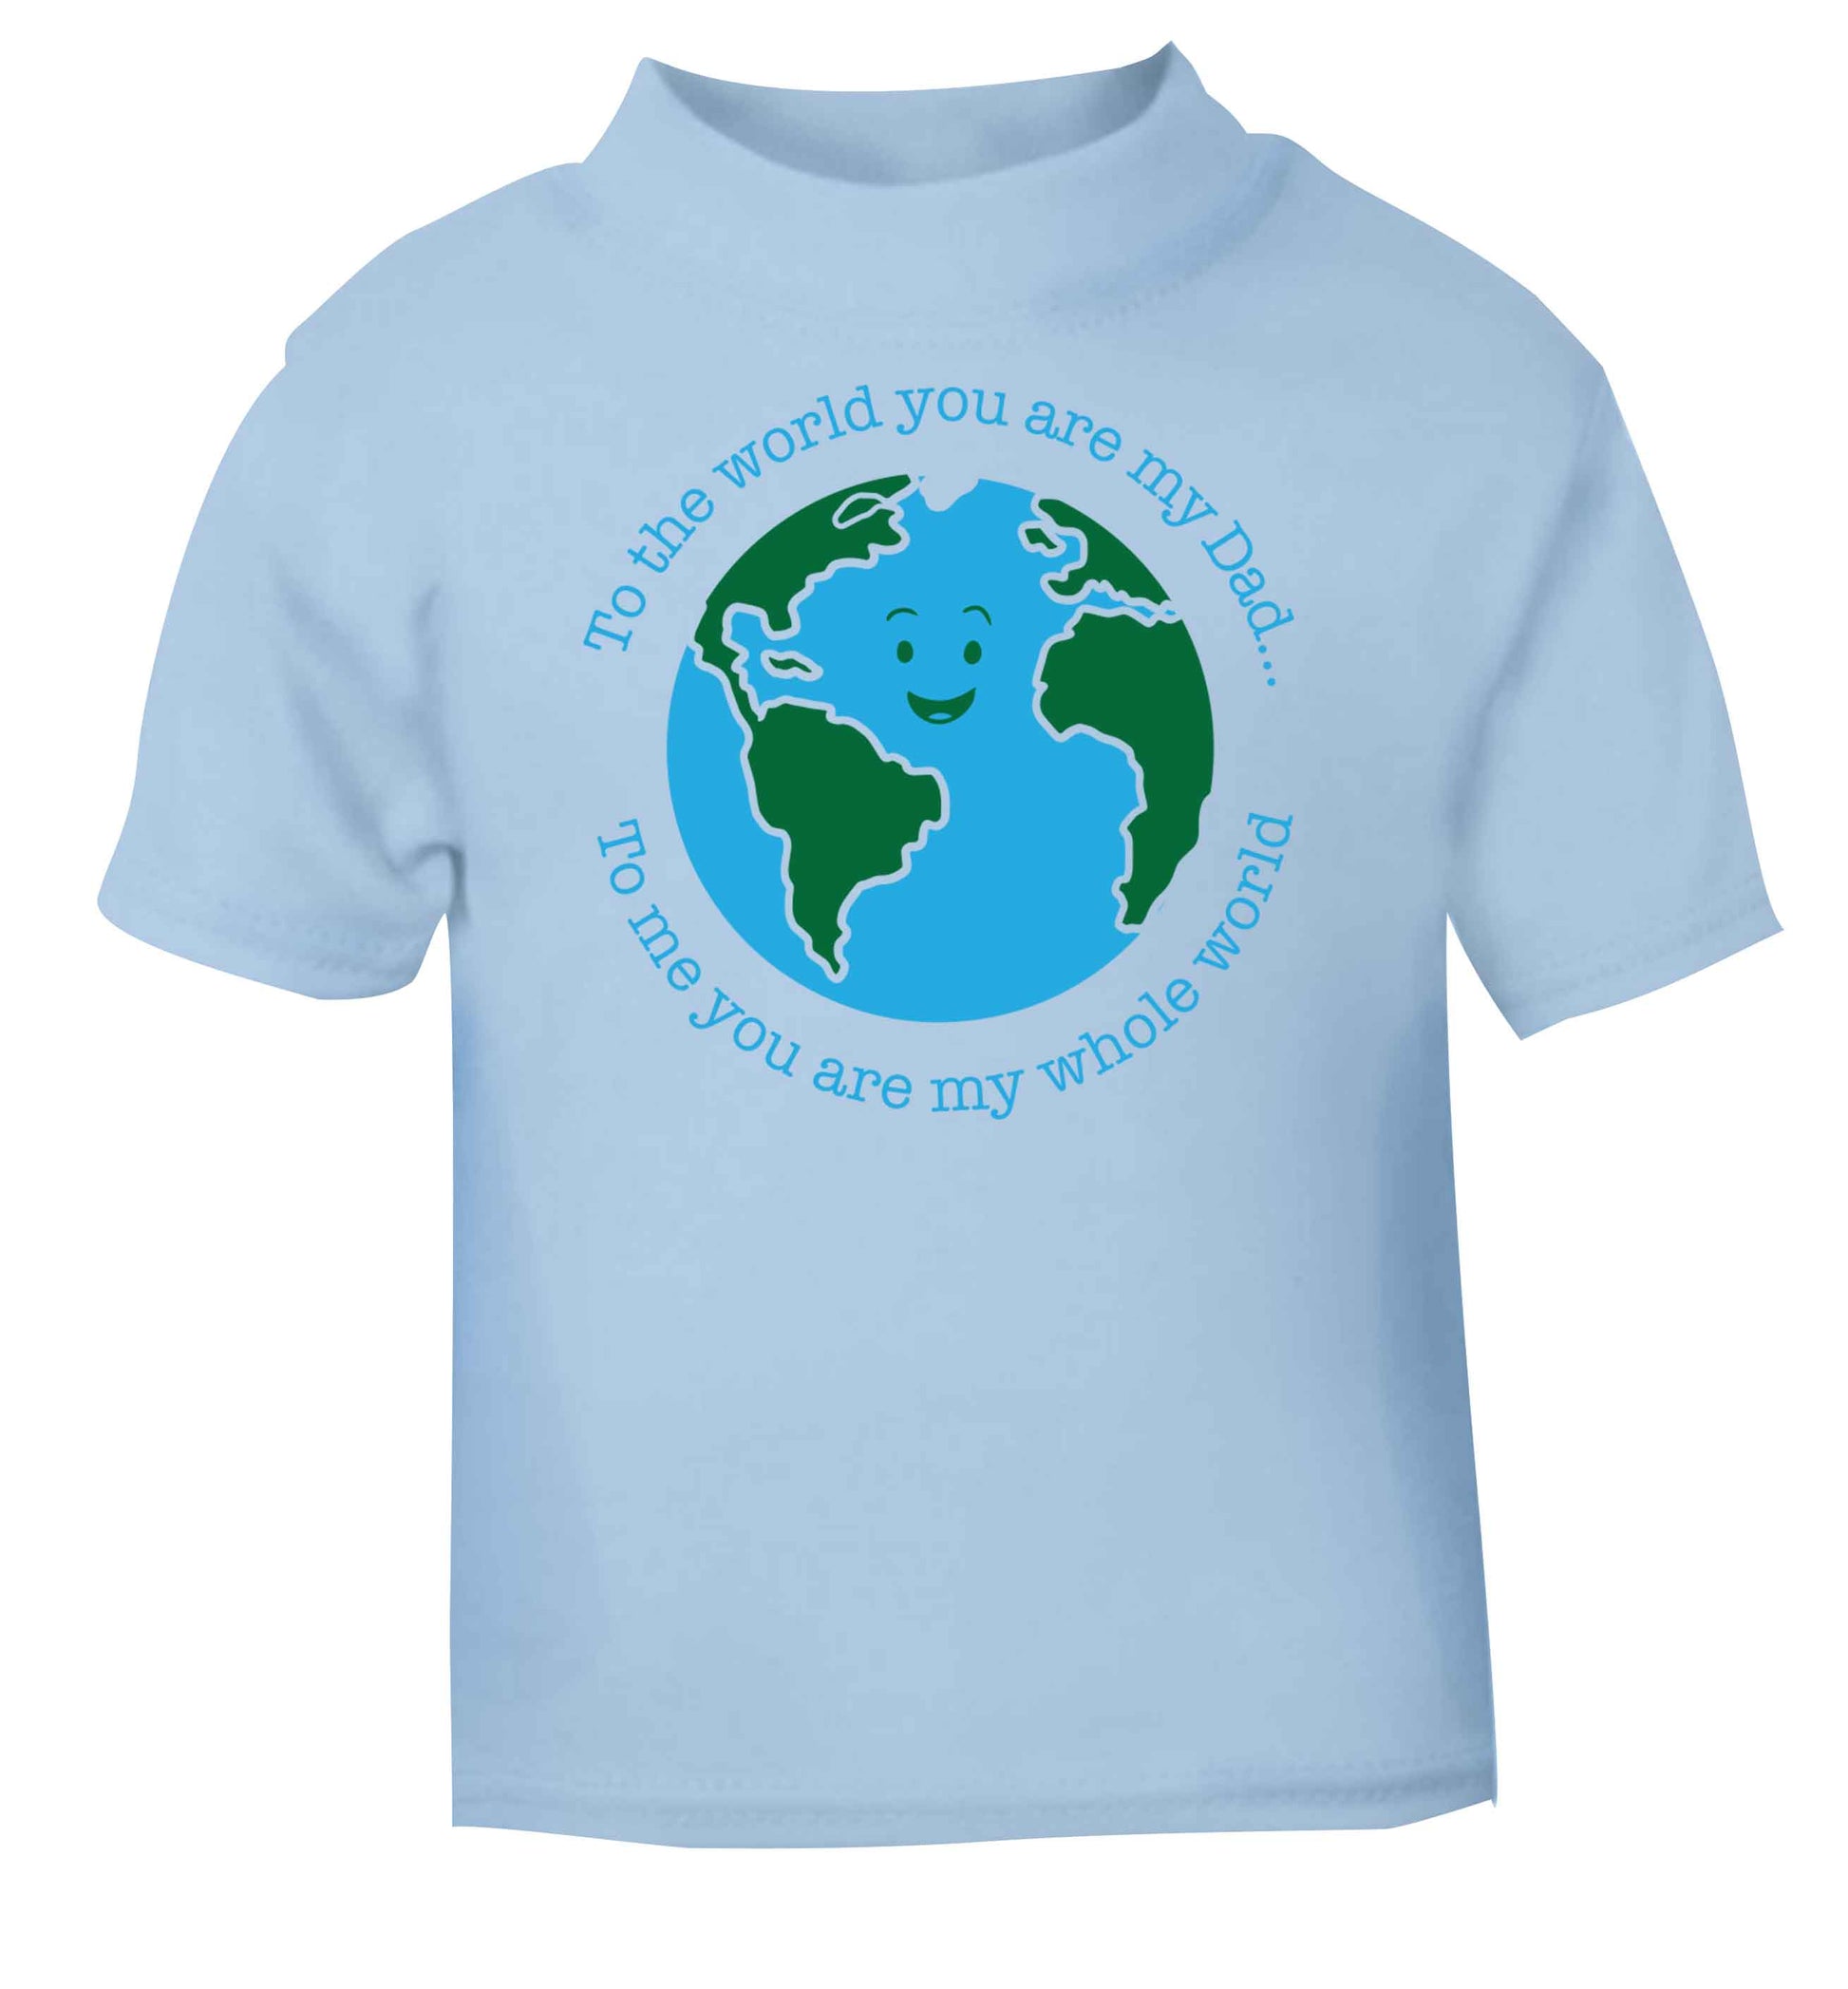 To the world you are my dad, to me you are my whole world light blue baby toddler Tshirt 2 Years